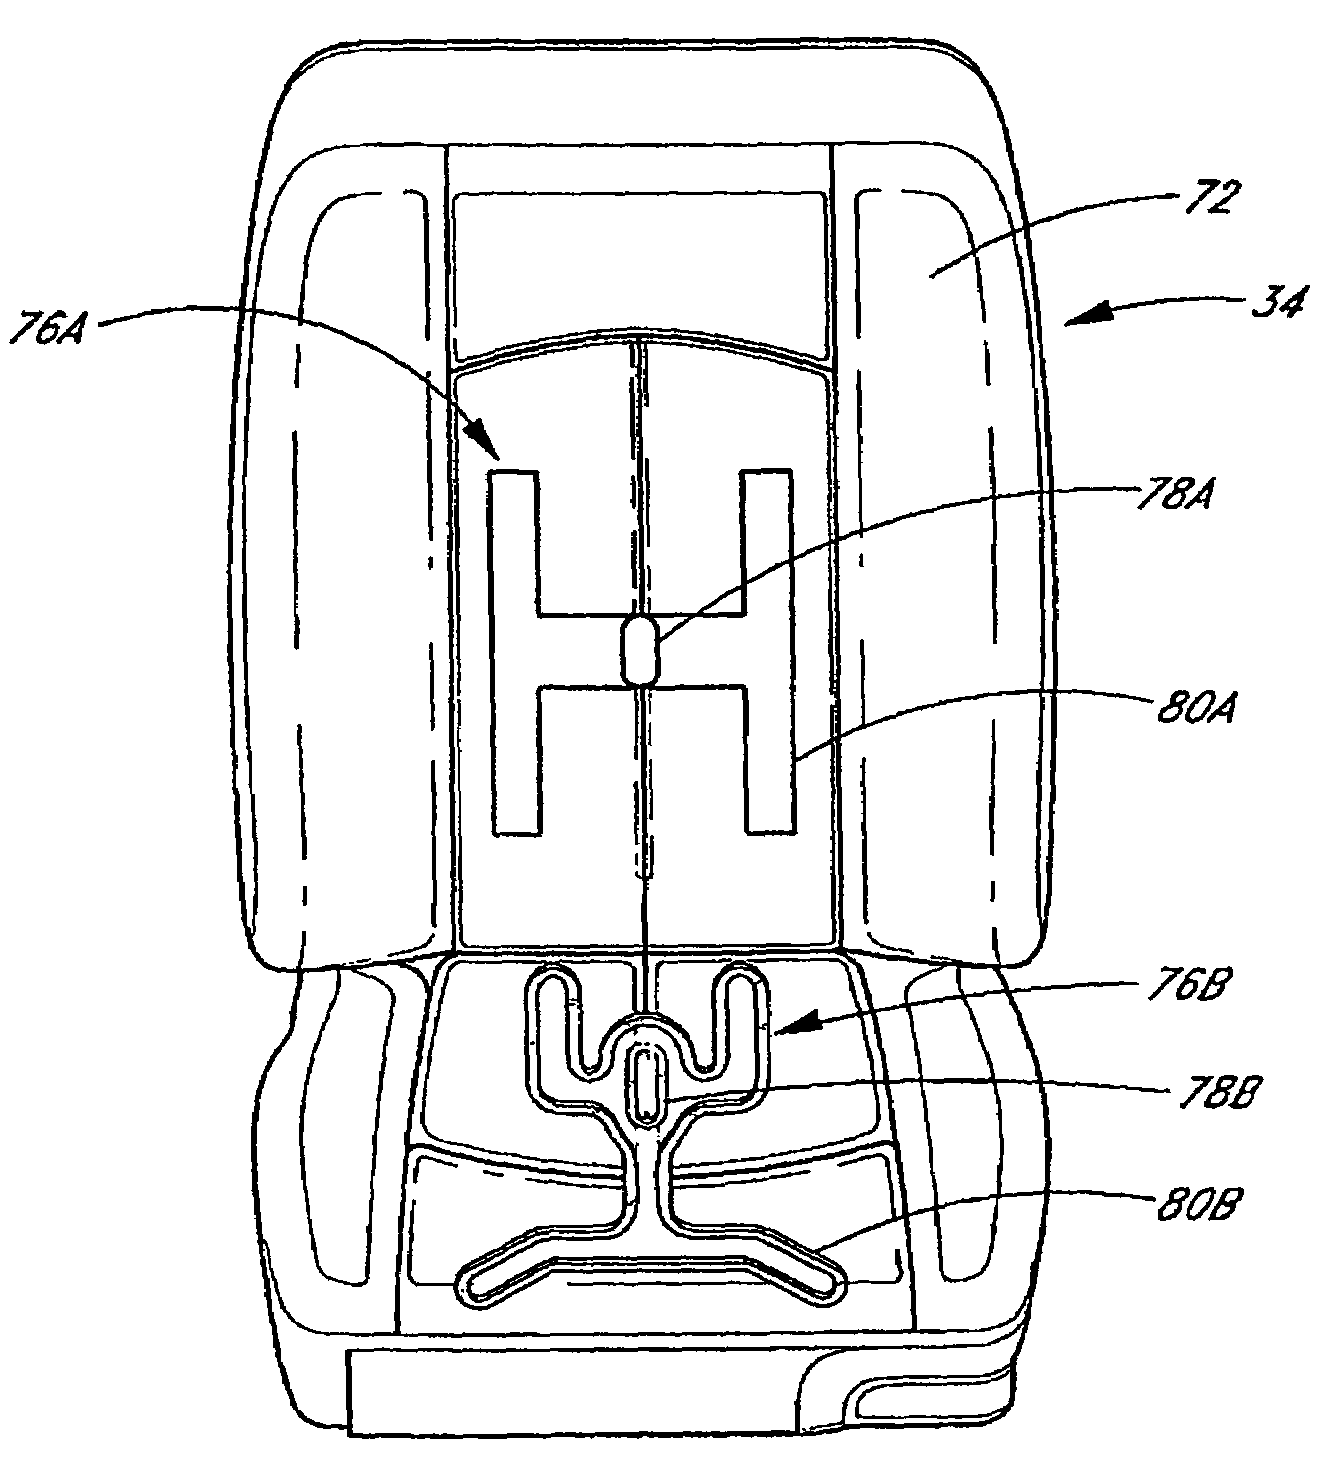 Control system for thermal module in vehicle